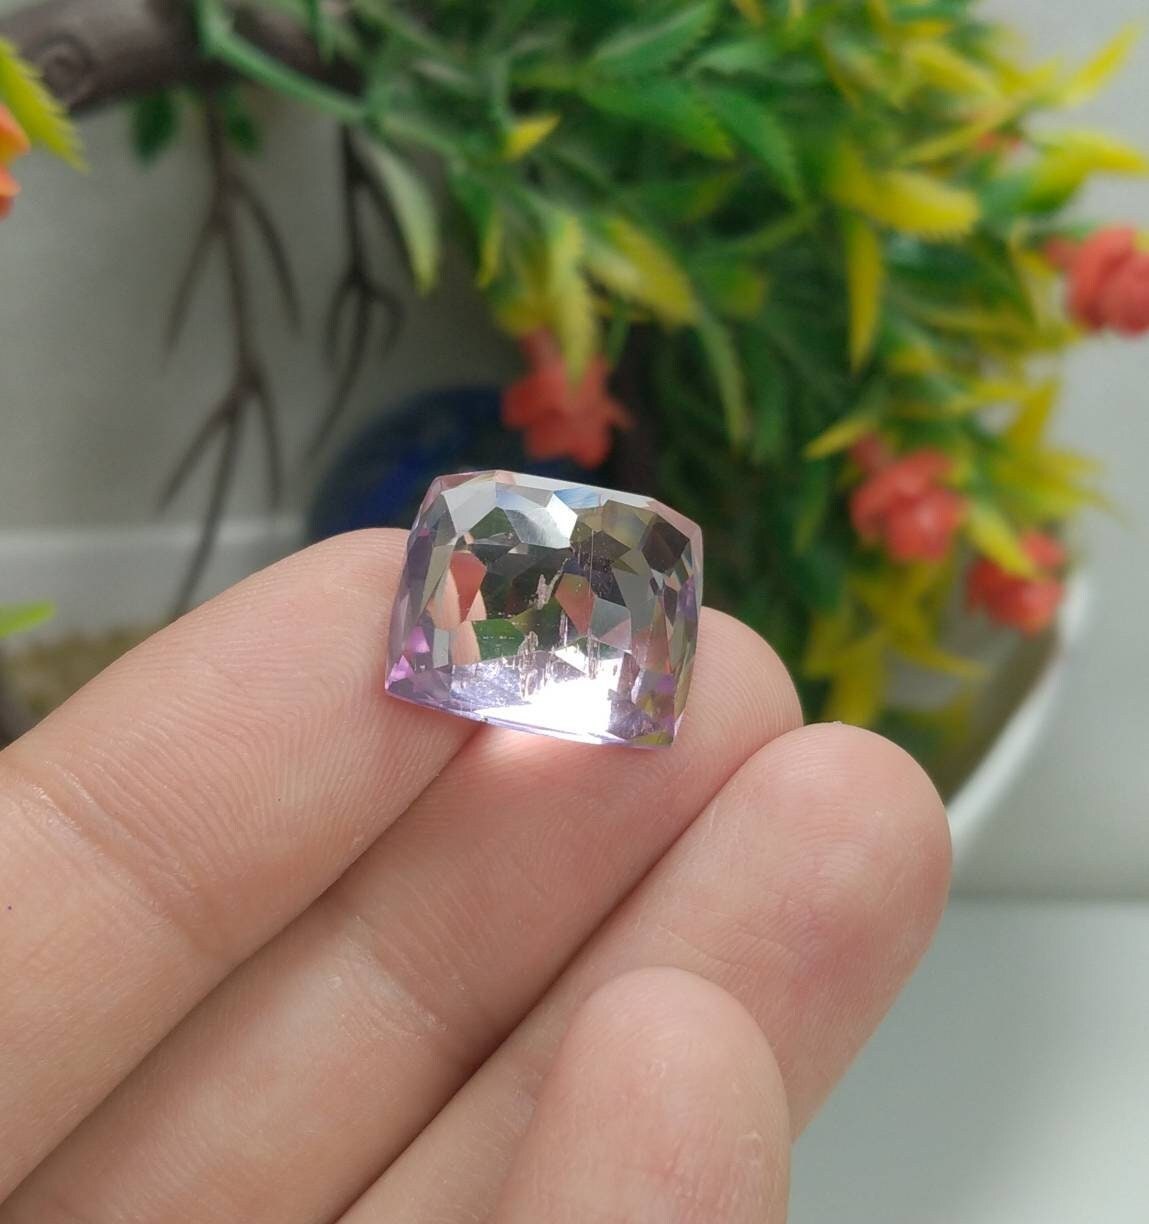 ARSAA GEMS AND MINERALSNatural top quality beautiful 20 carats faceted radiant shape kunzite gem - Premium  from ARSAA GEMS AND MINERALS - Just $40.00! Shop now at ARSAA GEMS AND MINERALS